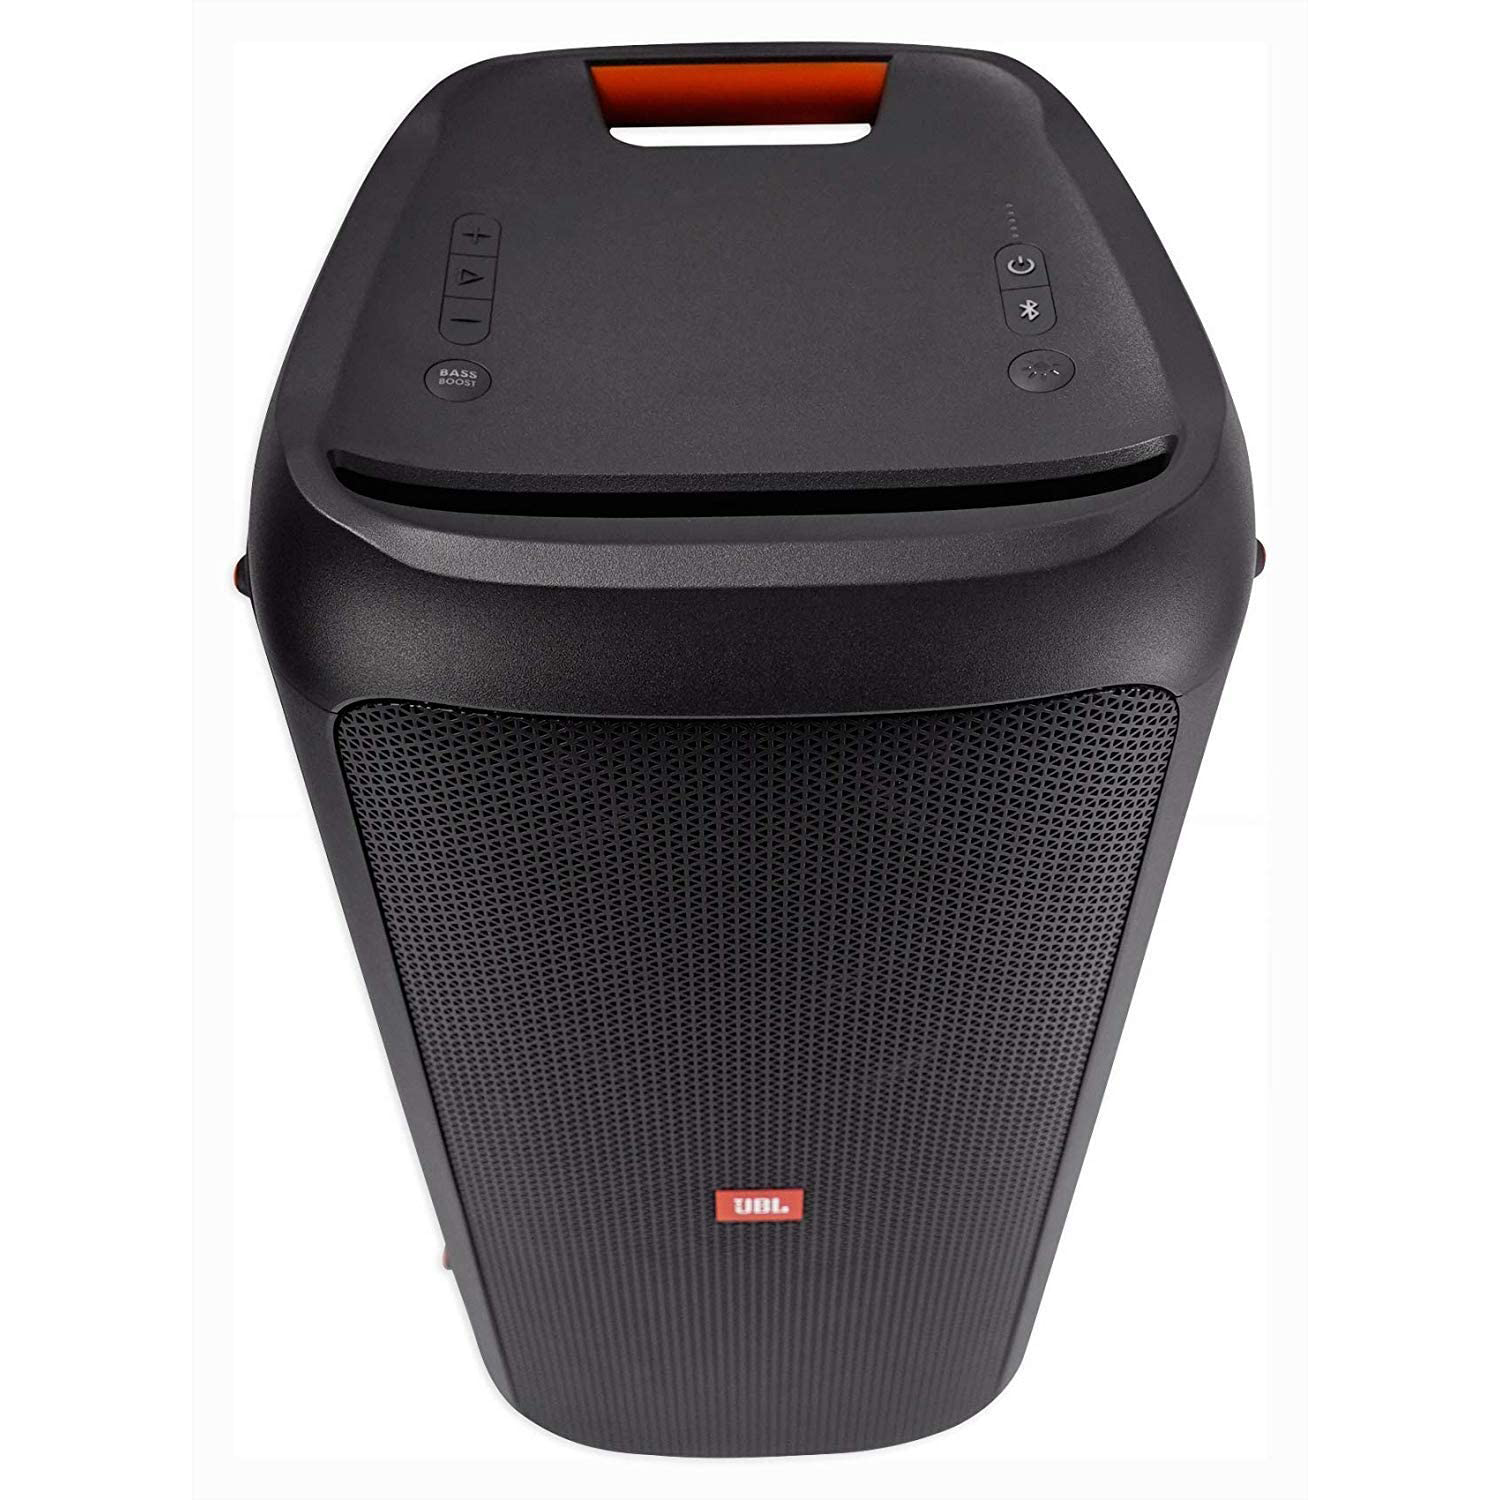 JBL JBLPARTYBOX300AM PartyBox 300 High Power Portable Wireless Bluetooth Audio System with Battery